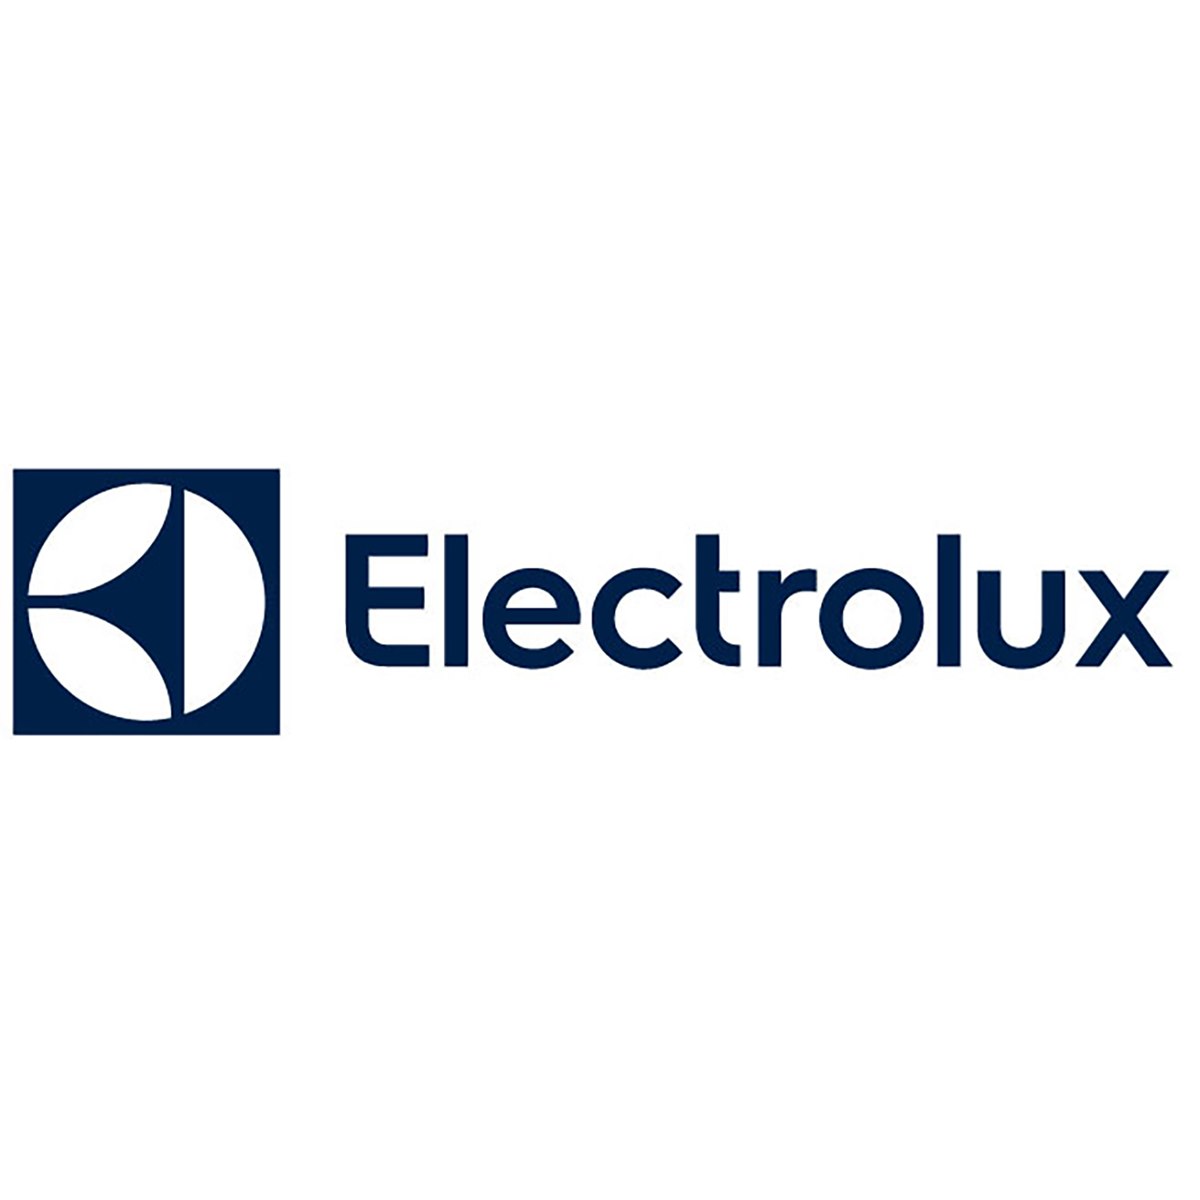 Where to buy Electrolux Cleaning Products